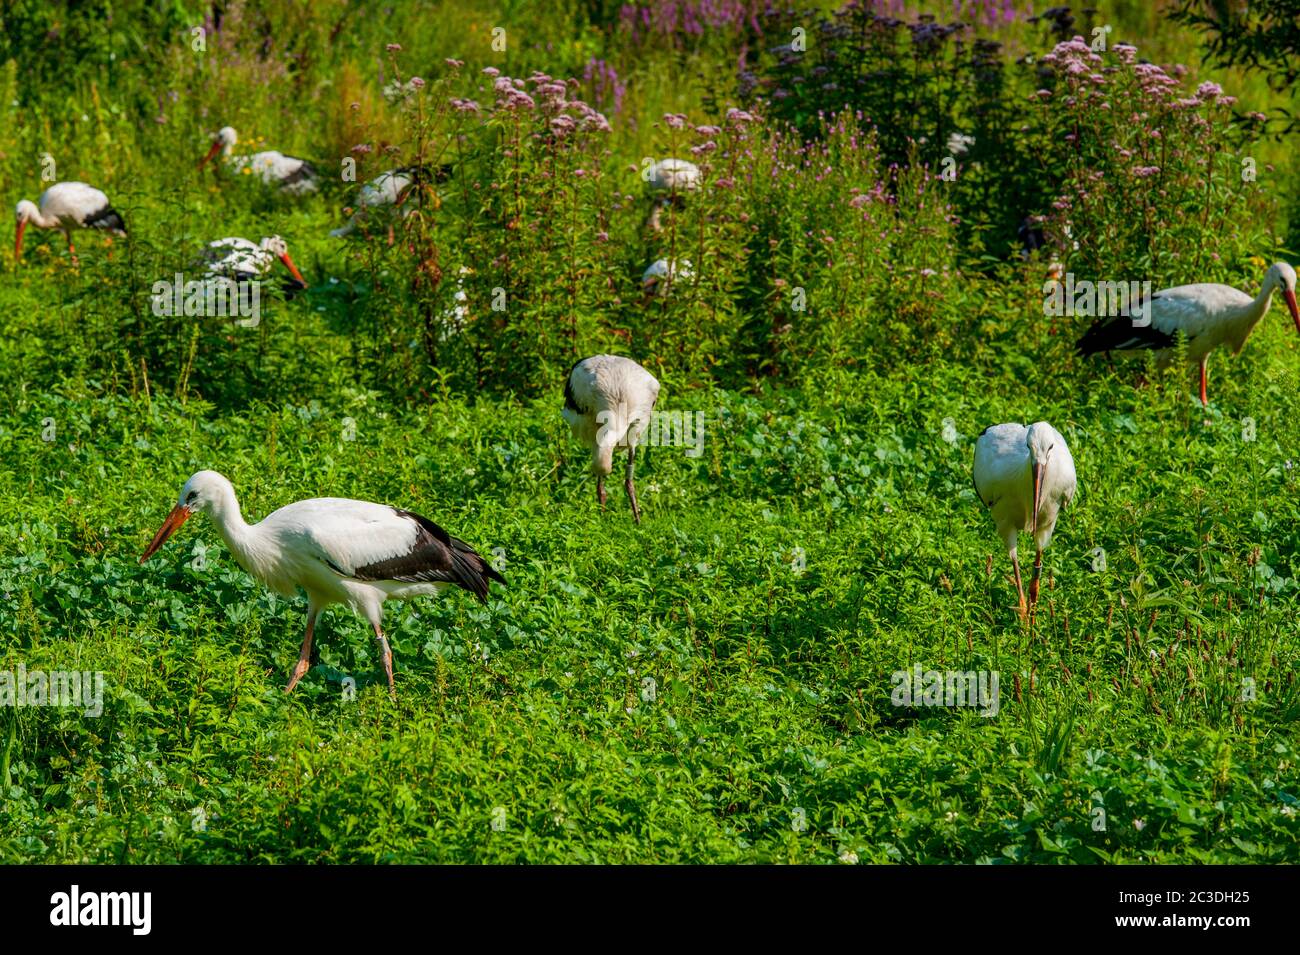 White storks (Ciconia ciconia) feeding in a meadow at the Centre de reintroduction des cigognes (Center to reintroduce the whit stork) near Hunawihr, Stock Photo